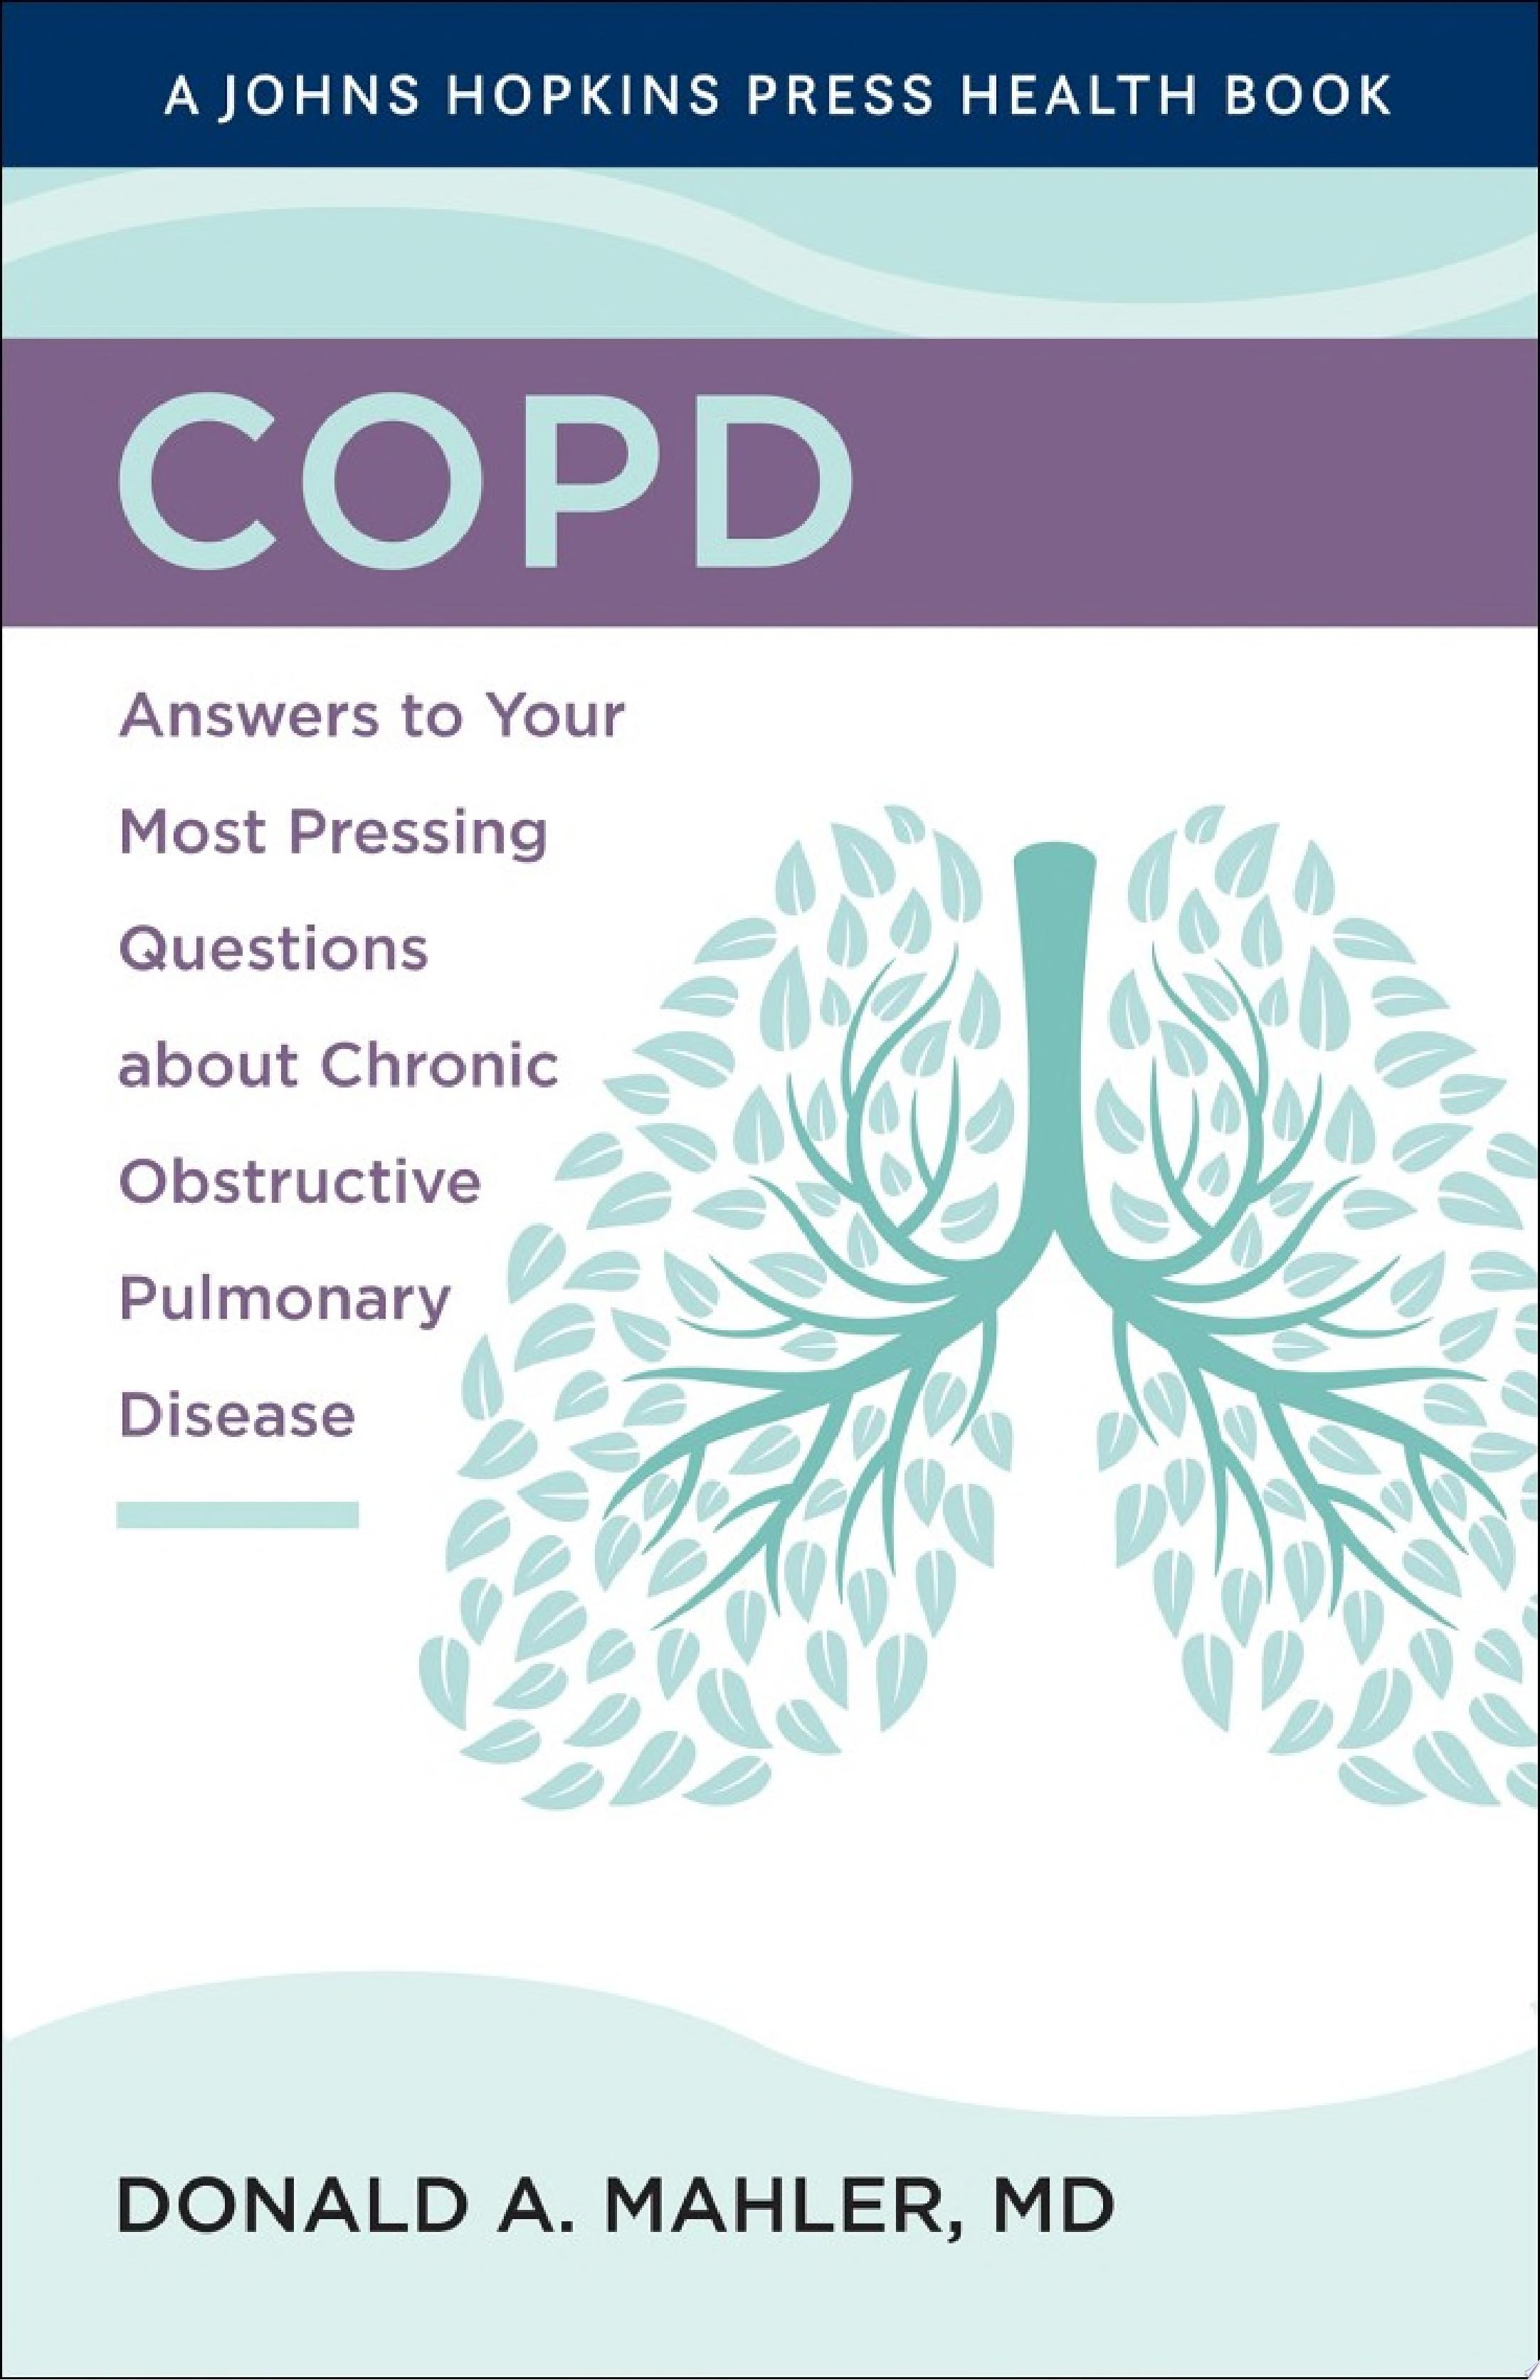 Image for "COPD"